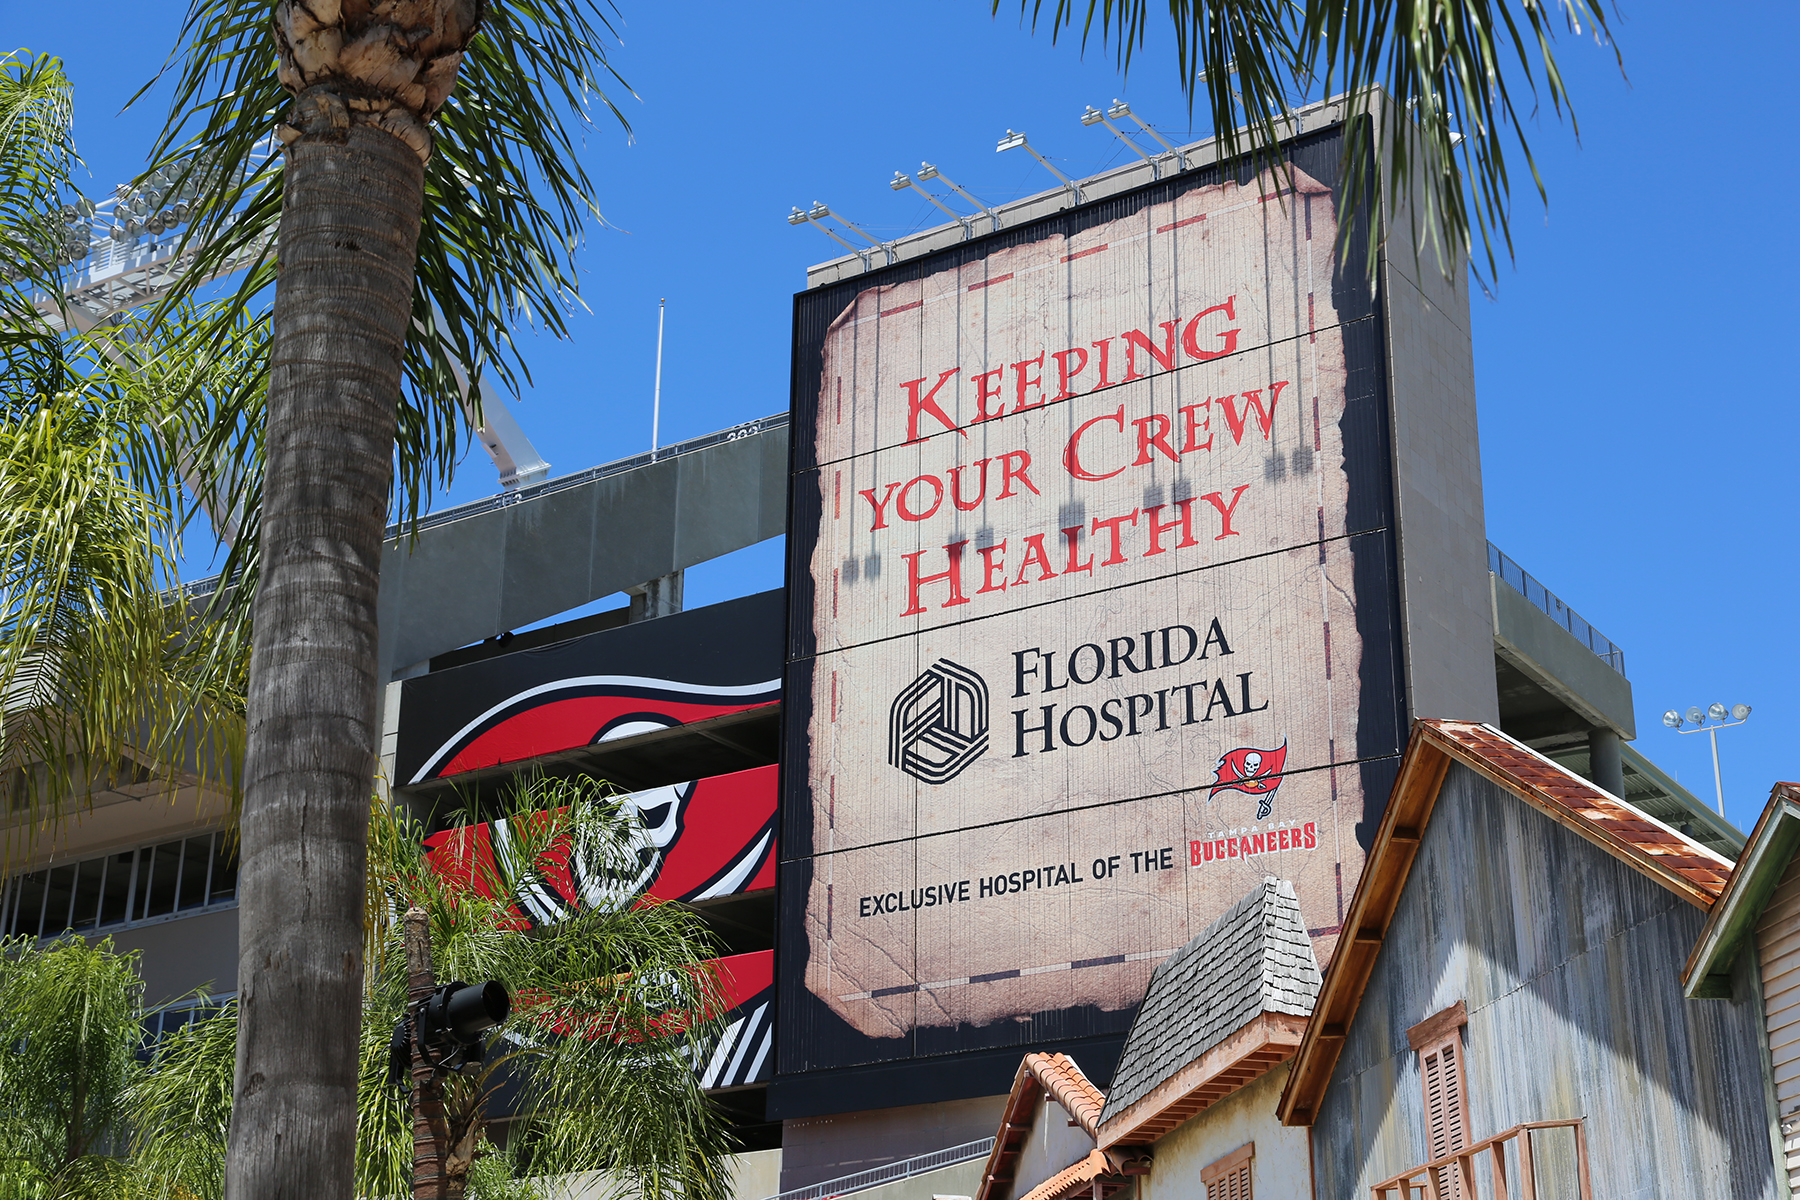 Florida Hospital, Exclusive Hospital of the Tampa Bay Bucs